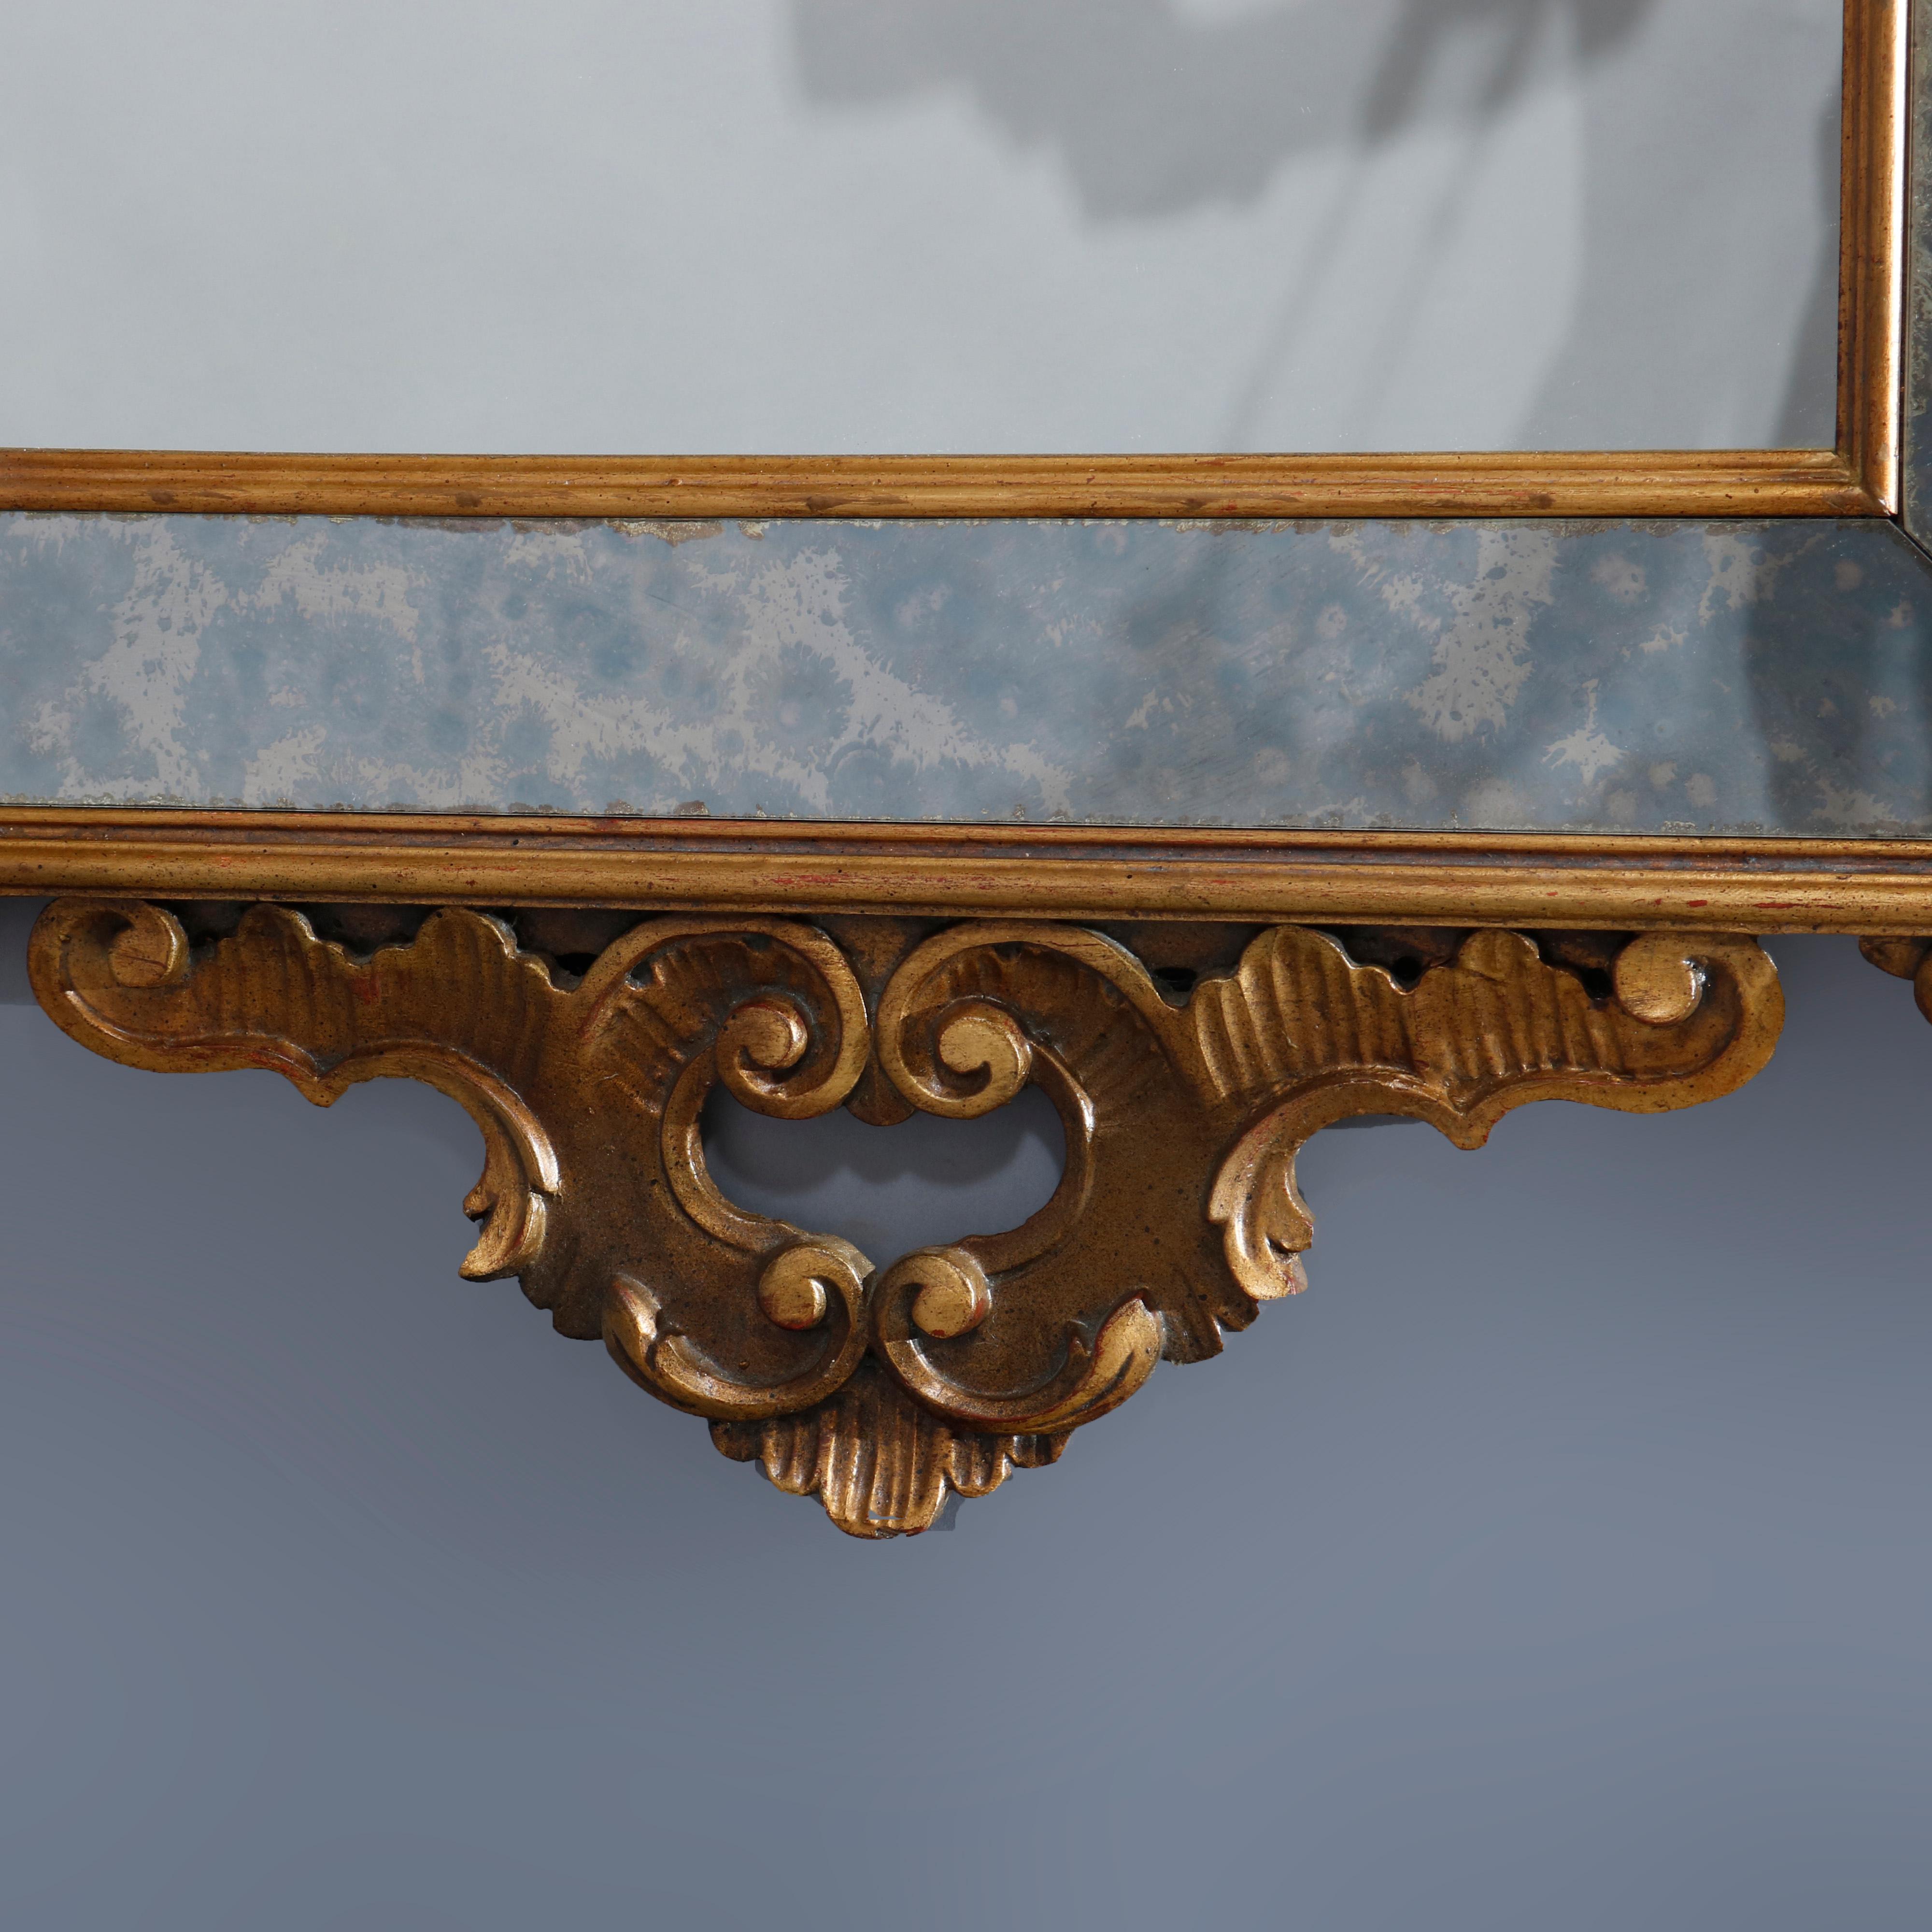 Vintage Italian Rococo Style Giltwood Parclose Over Mantel Mirror by Karges 9